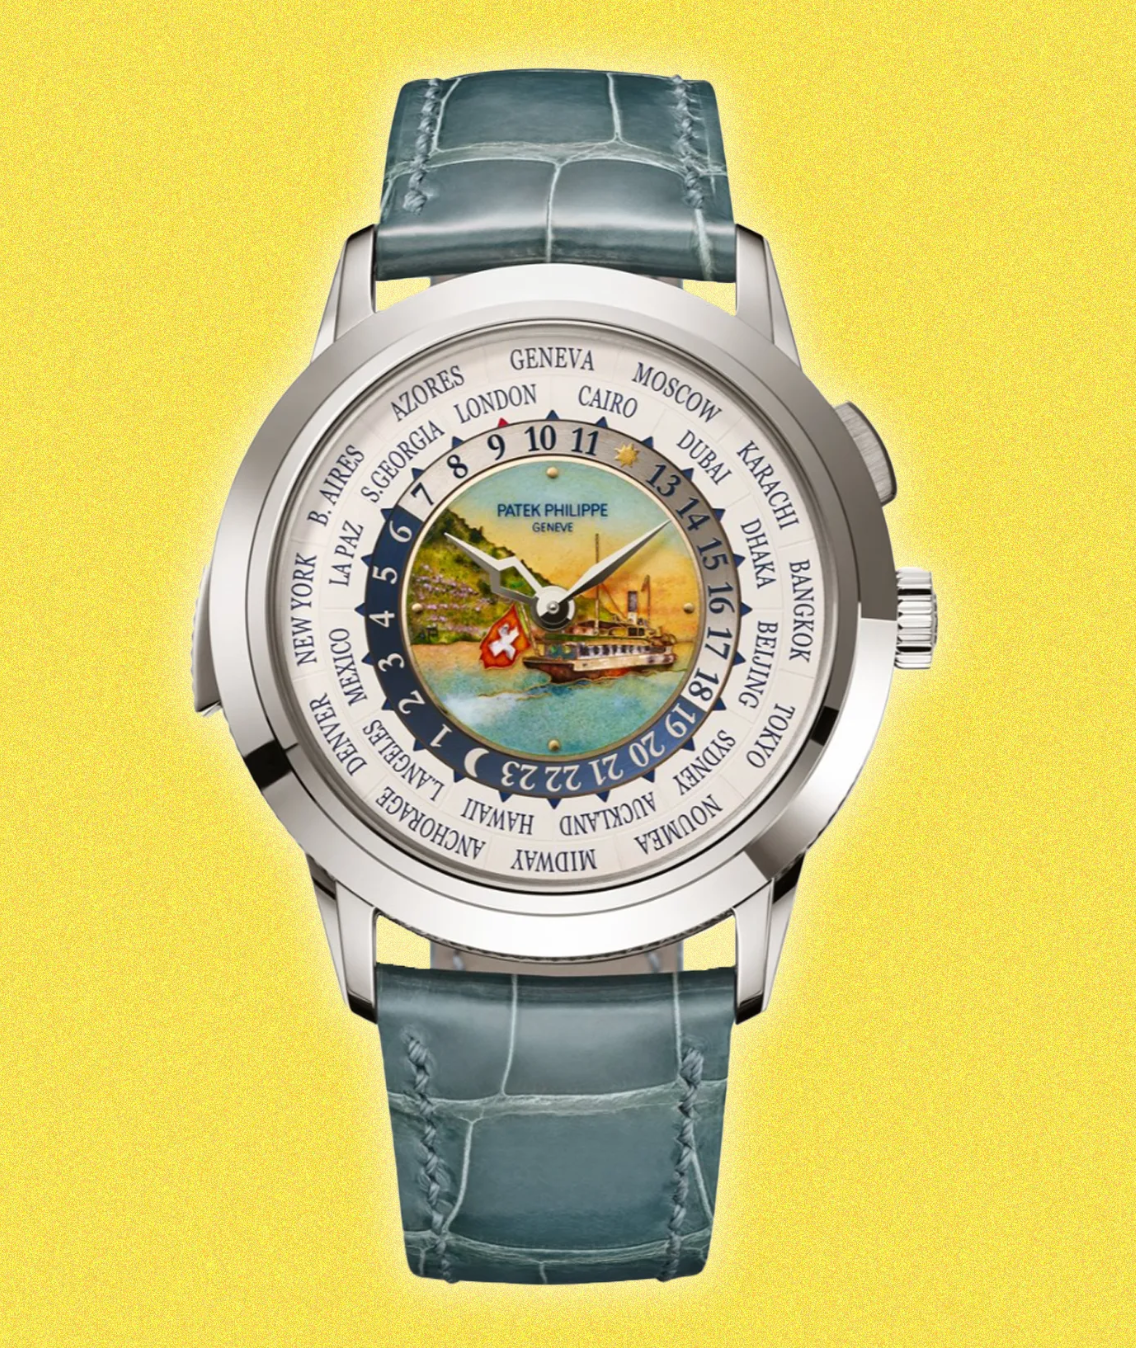 The best retro-looking replica watches that are actually brand new